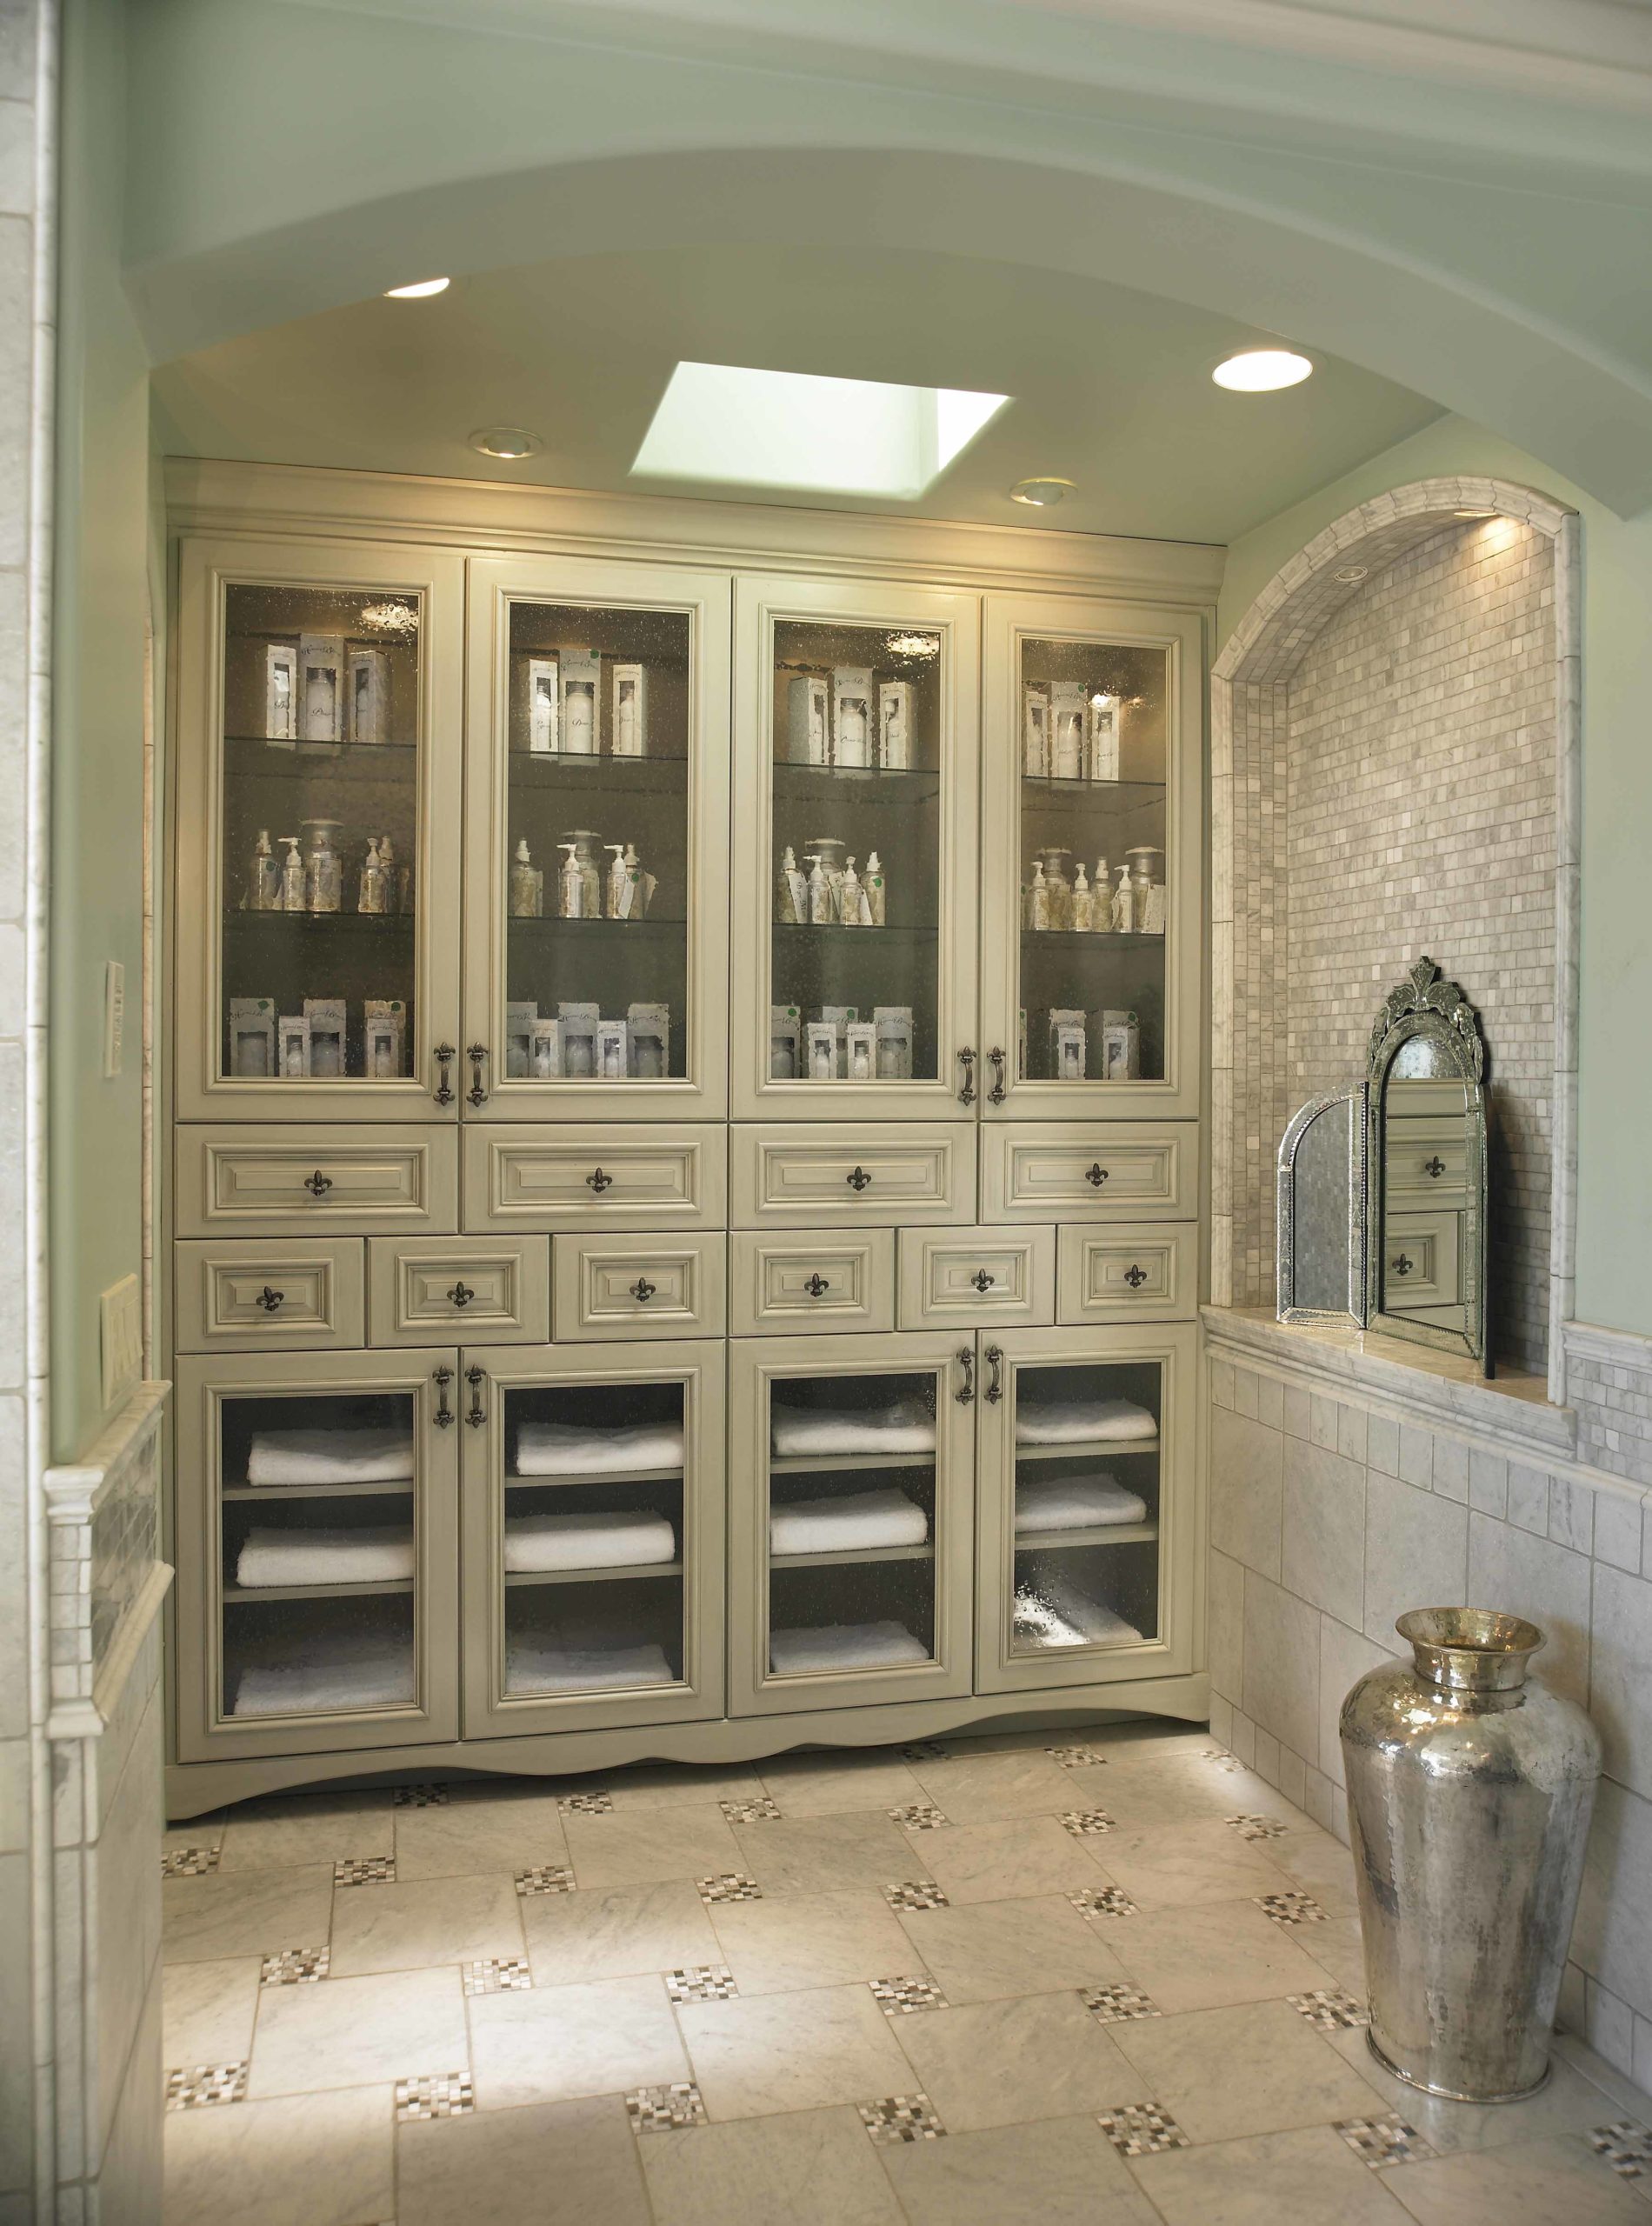 Bathroom storage in cream cabinets lining a wall with tiled floors